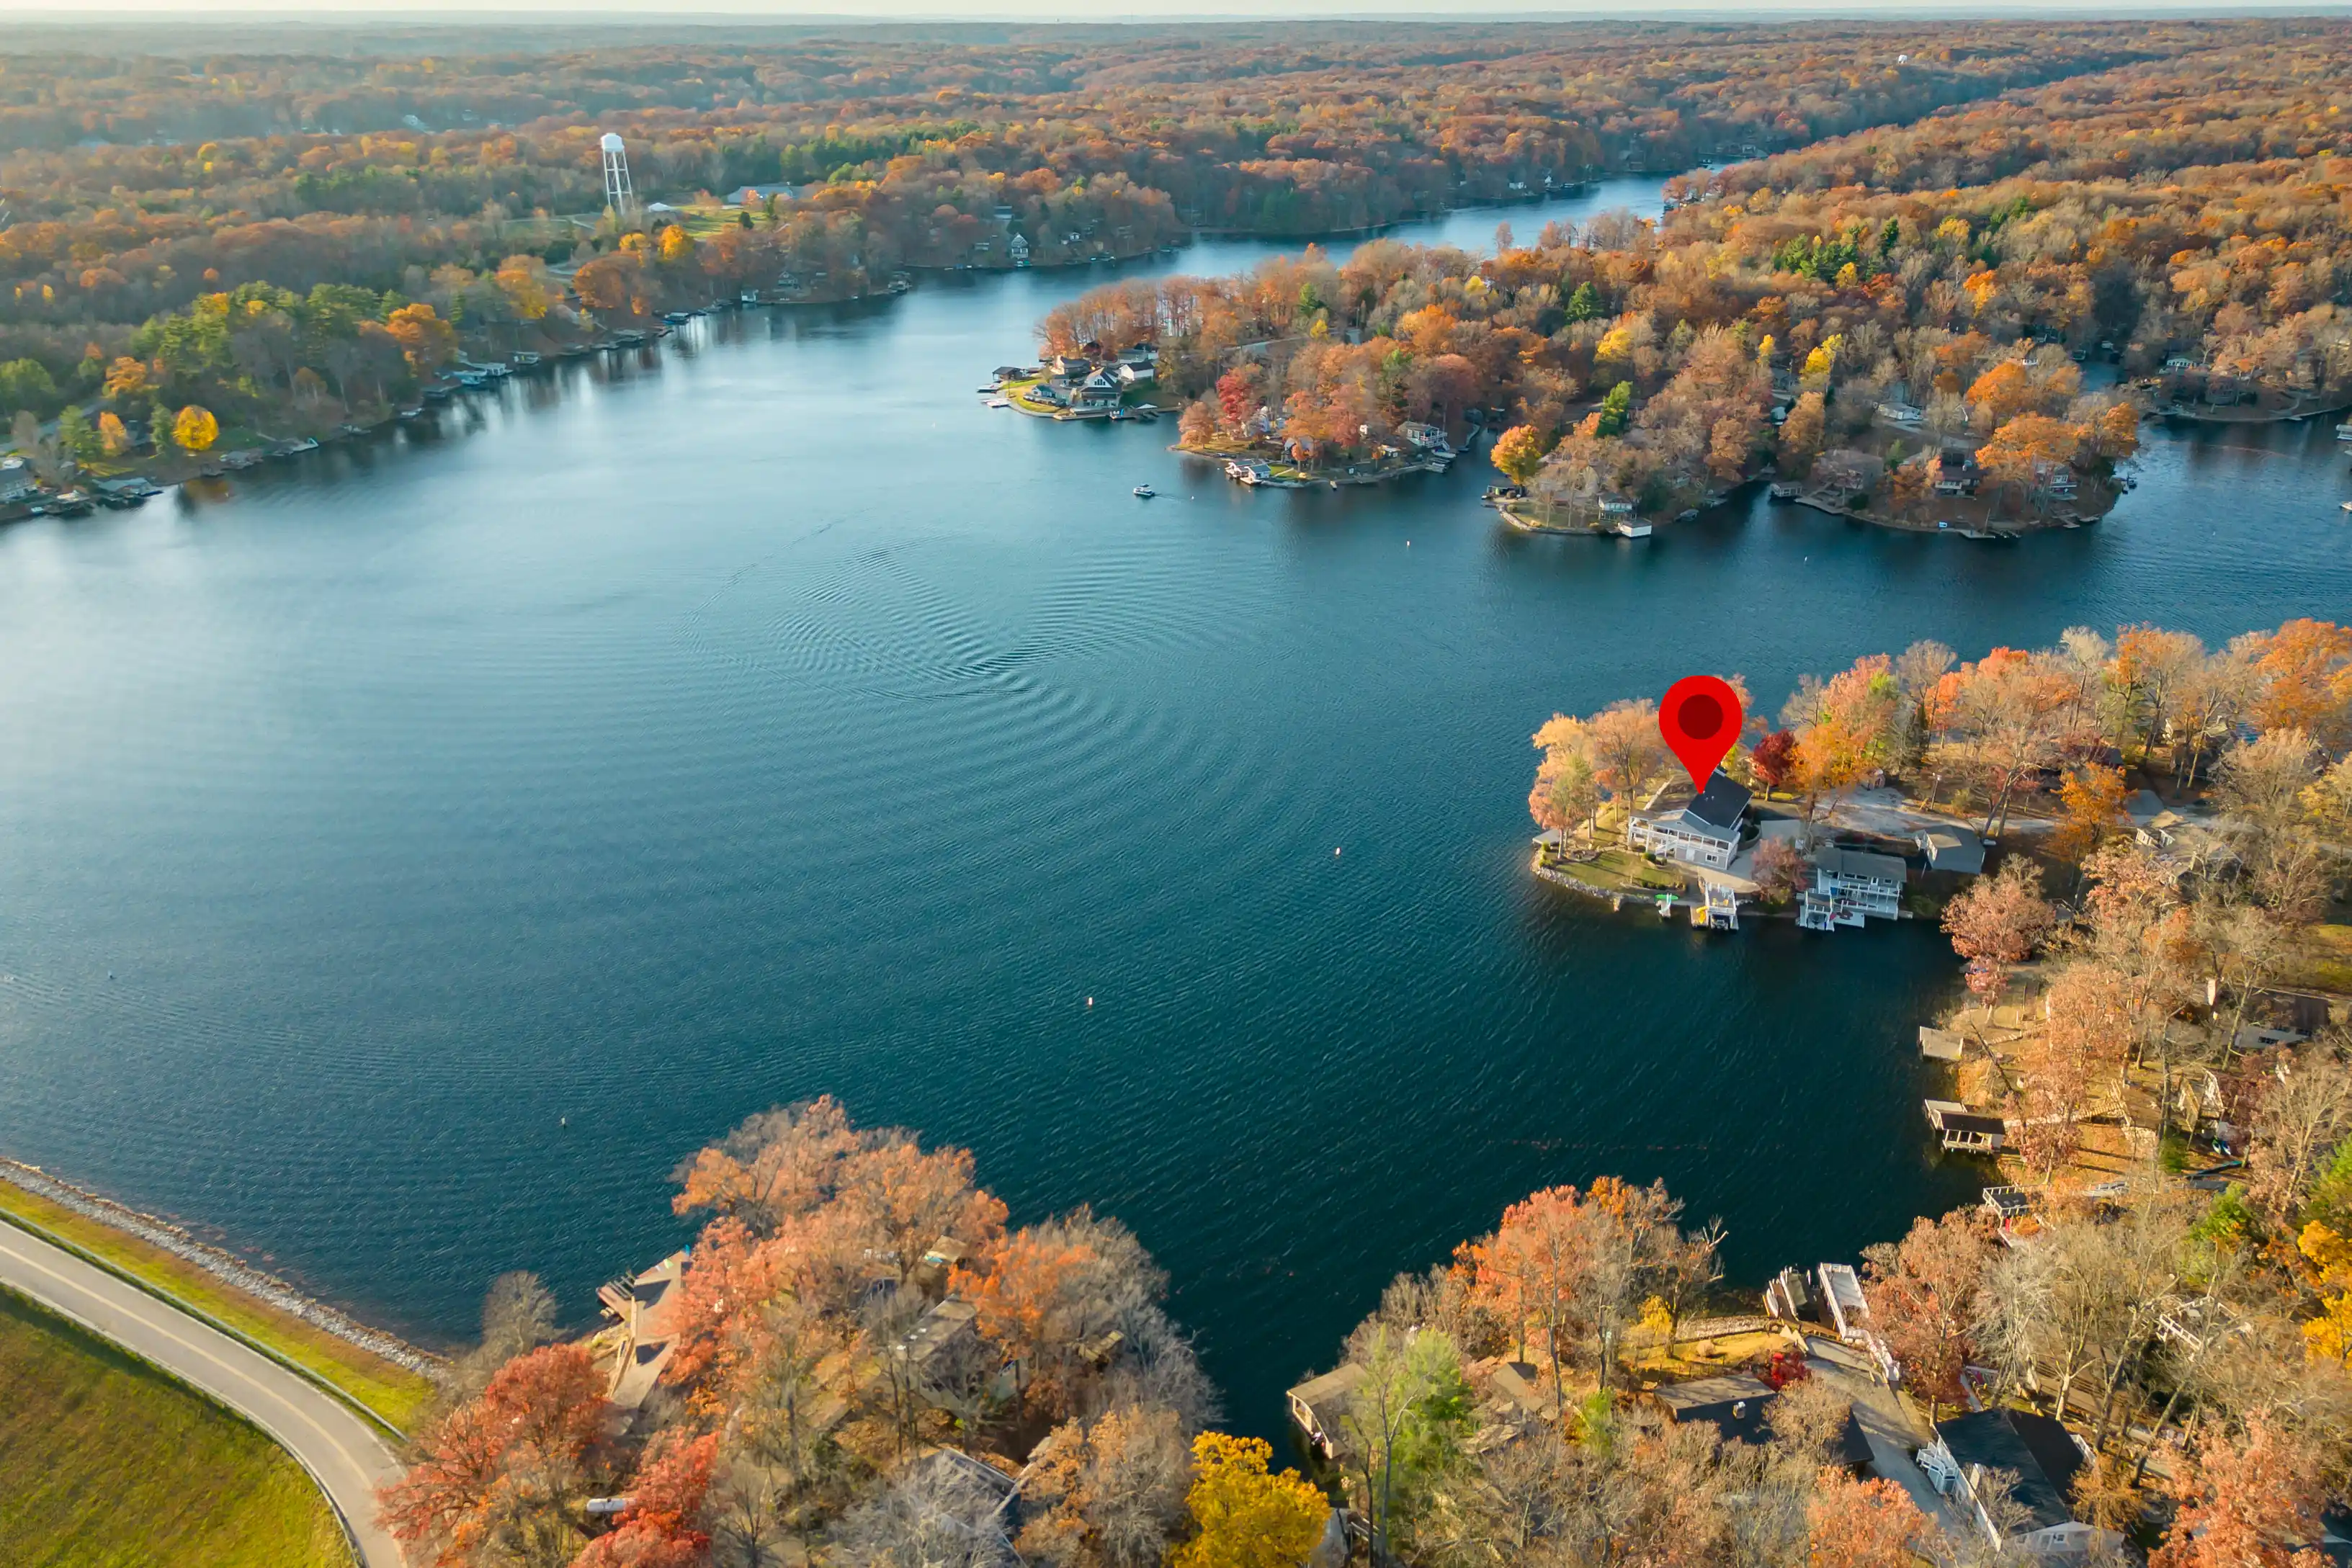 Aerial view of a lake surrounded by houses with docks amidst autumn-colored trees, with a red location marker pinpointing a specific property.